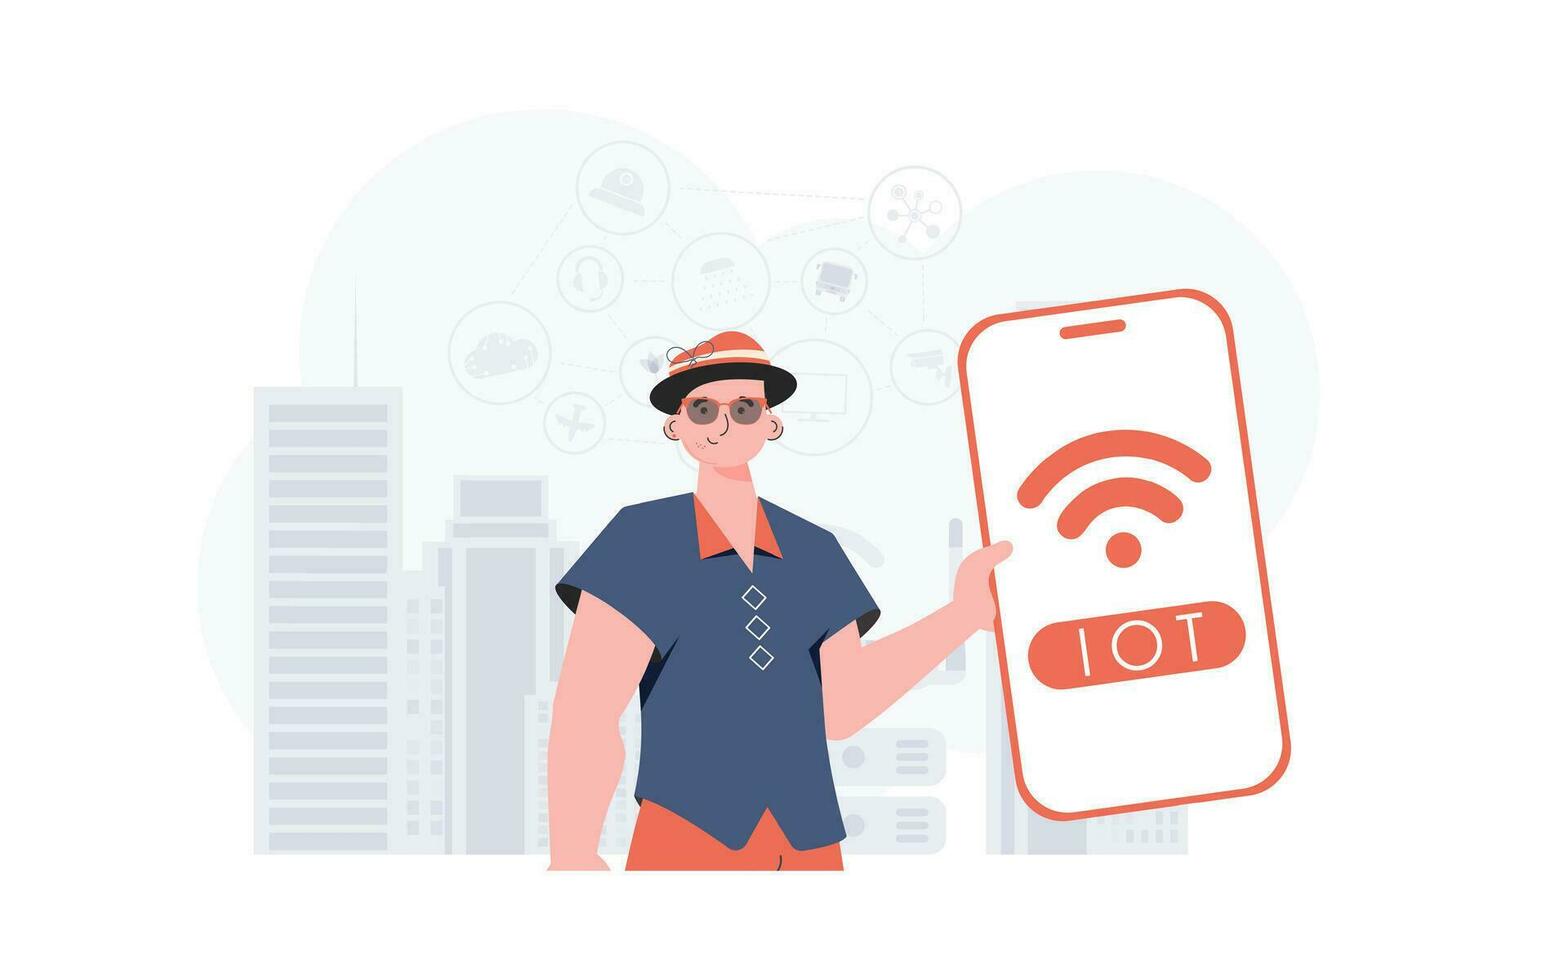 IOT and automation concept. A man holds a phone with the IoT logo in his hands. Vector illustration in flat style.